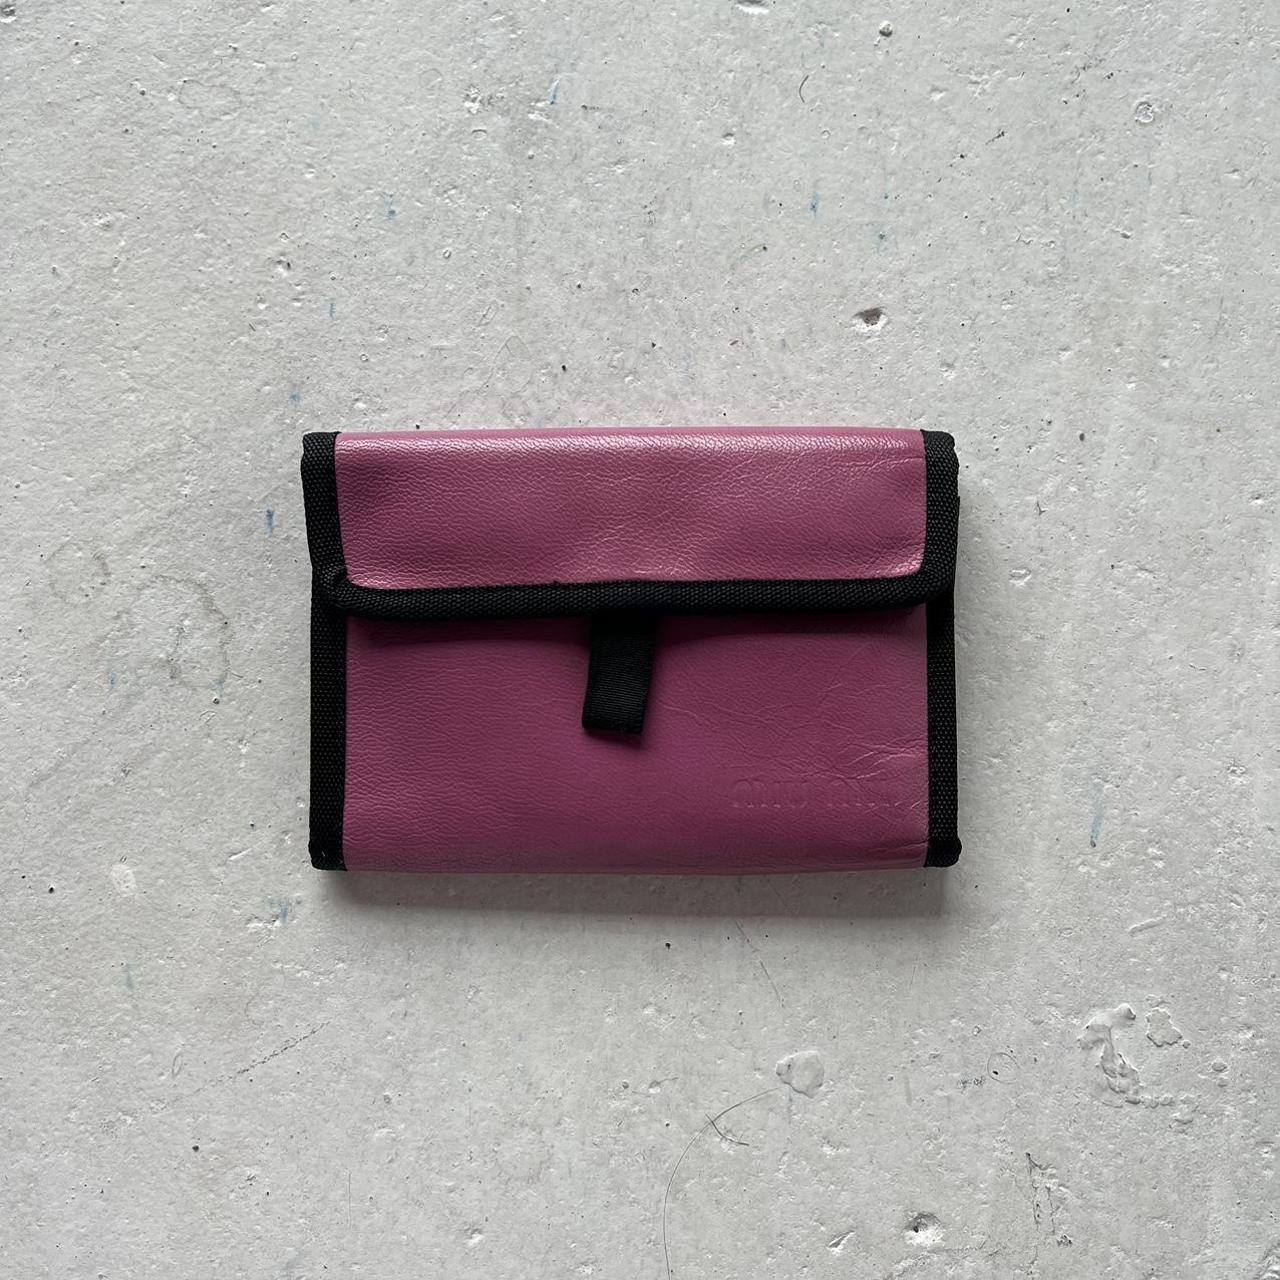 90s Miu Miu pink trifold wallet , perfect condition